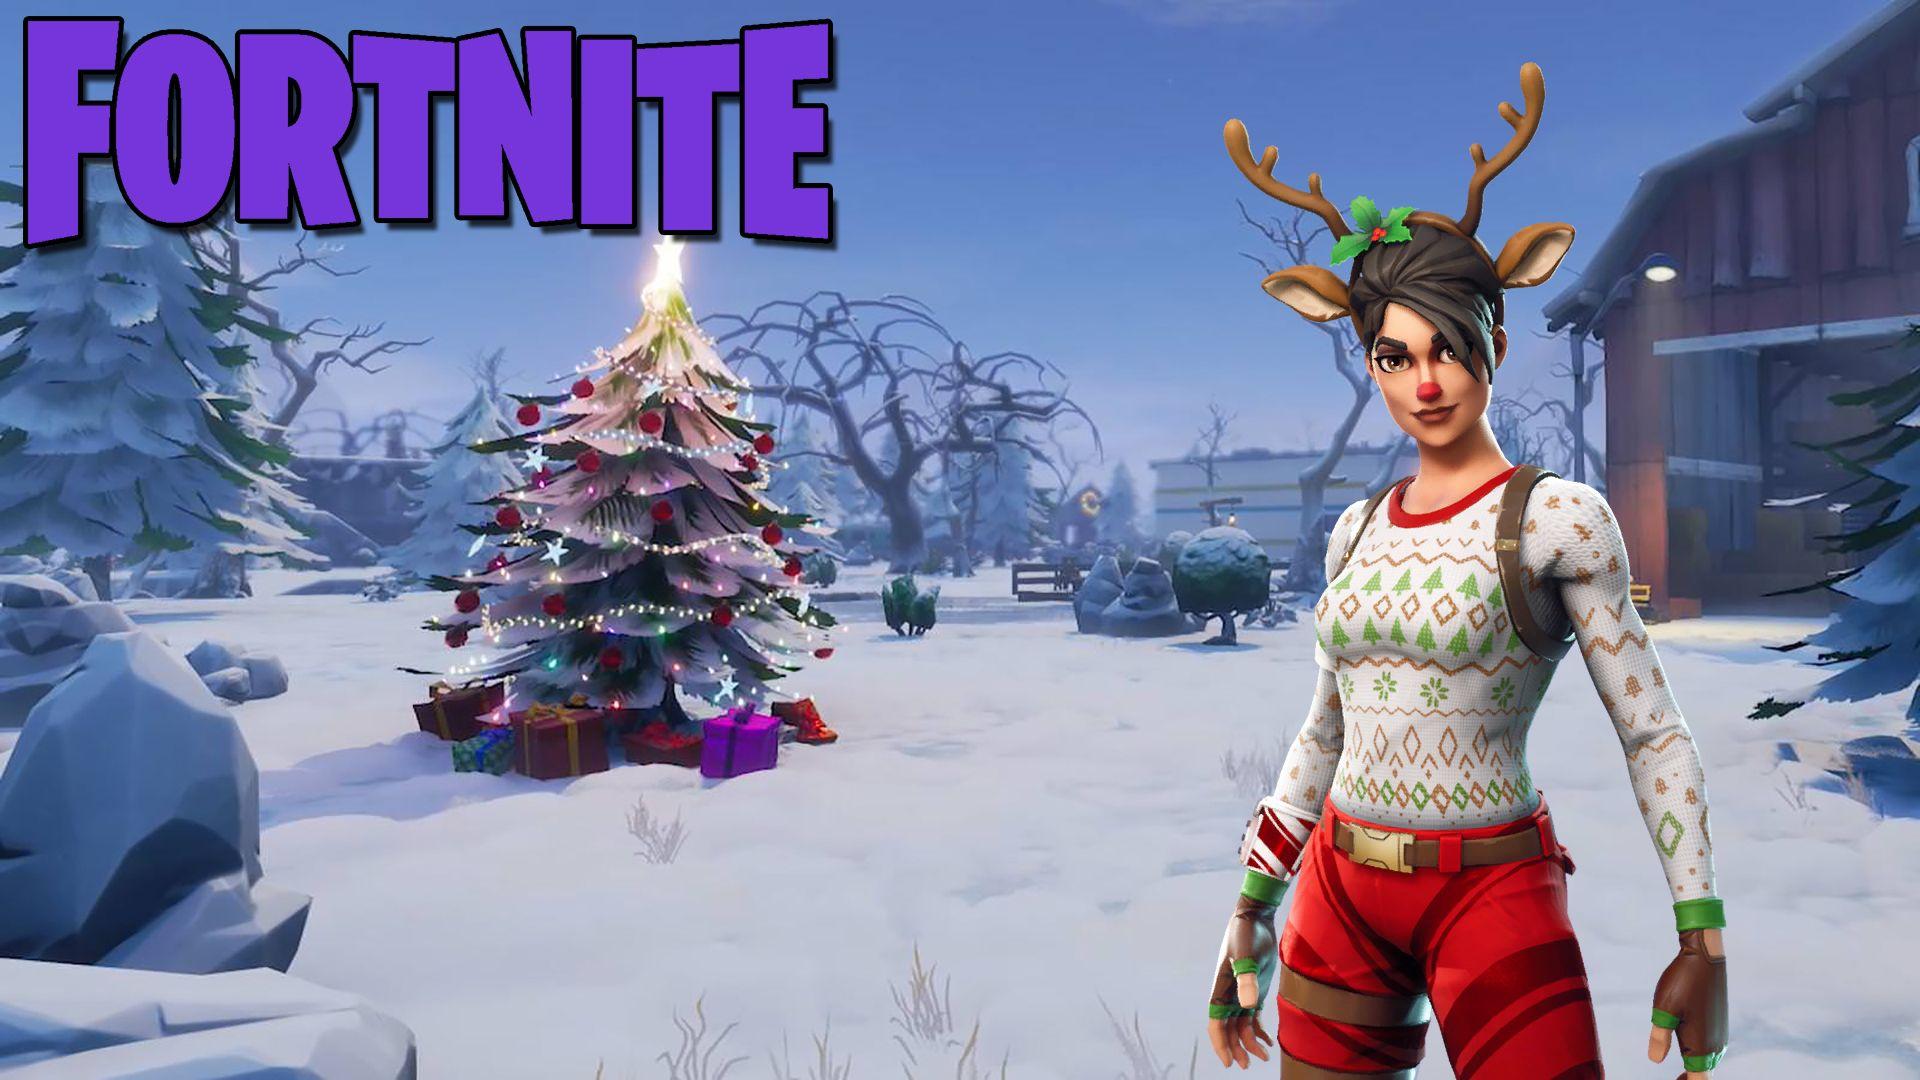 1920x1080 red nosed raider fortnite outfit skin how to get news fortnite watch - fortnite red nosed raider